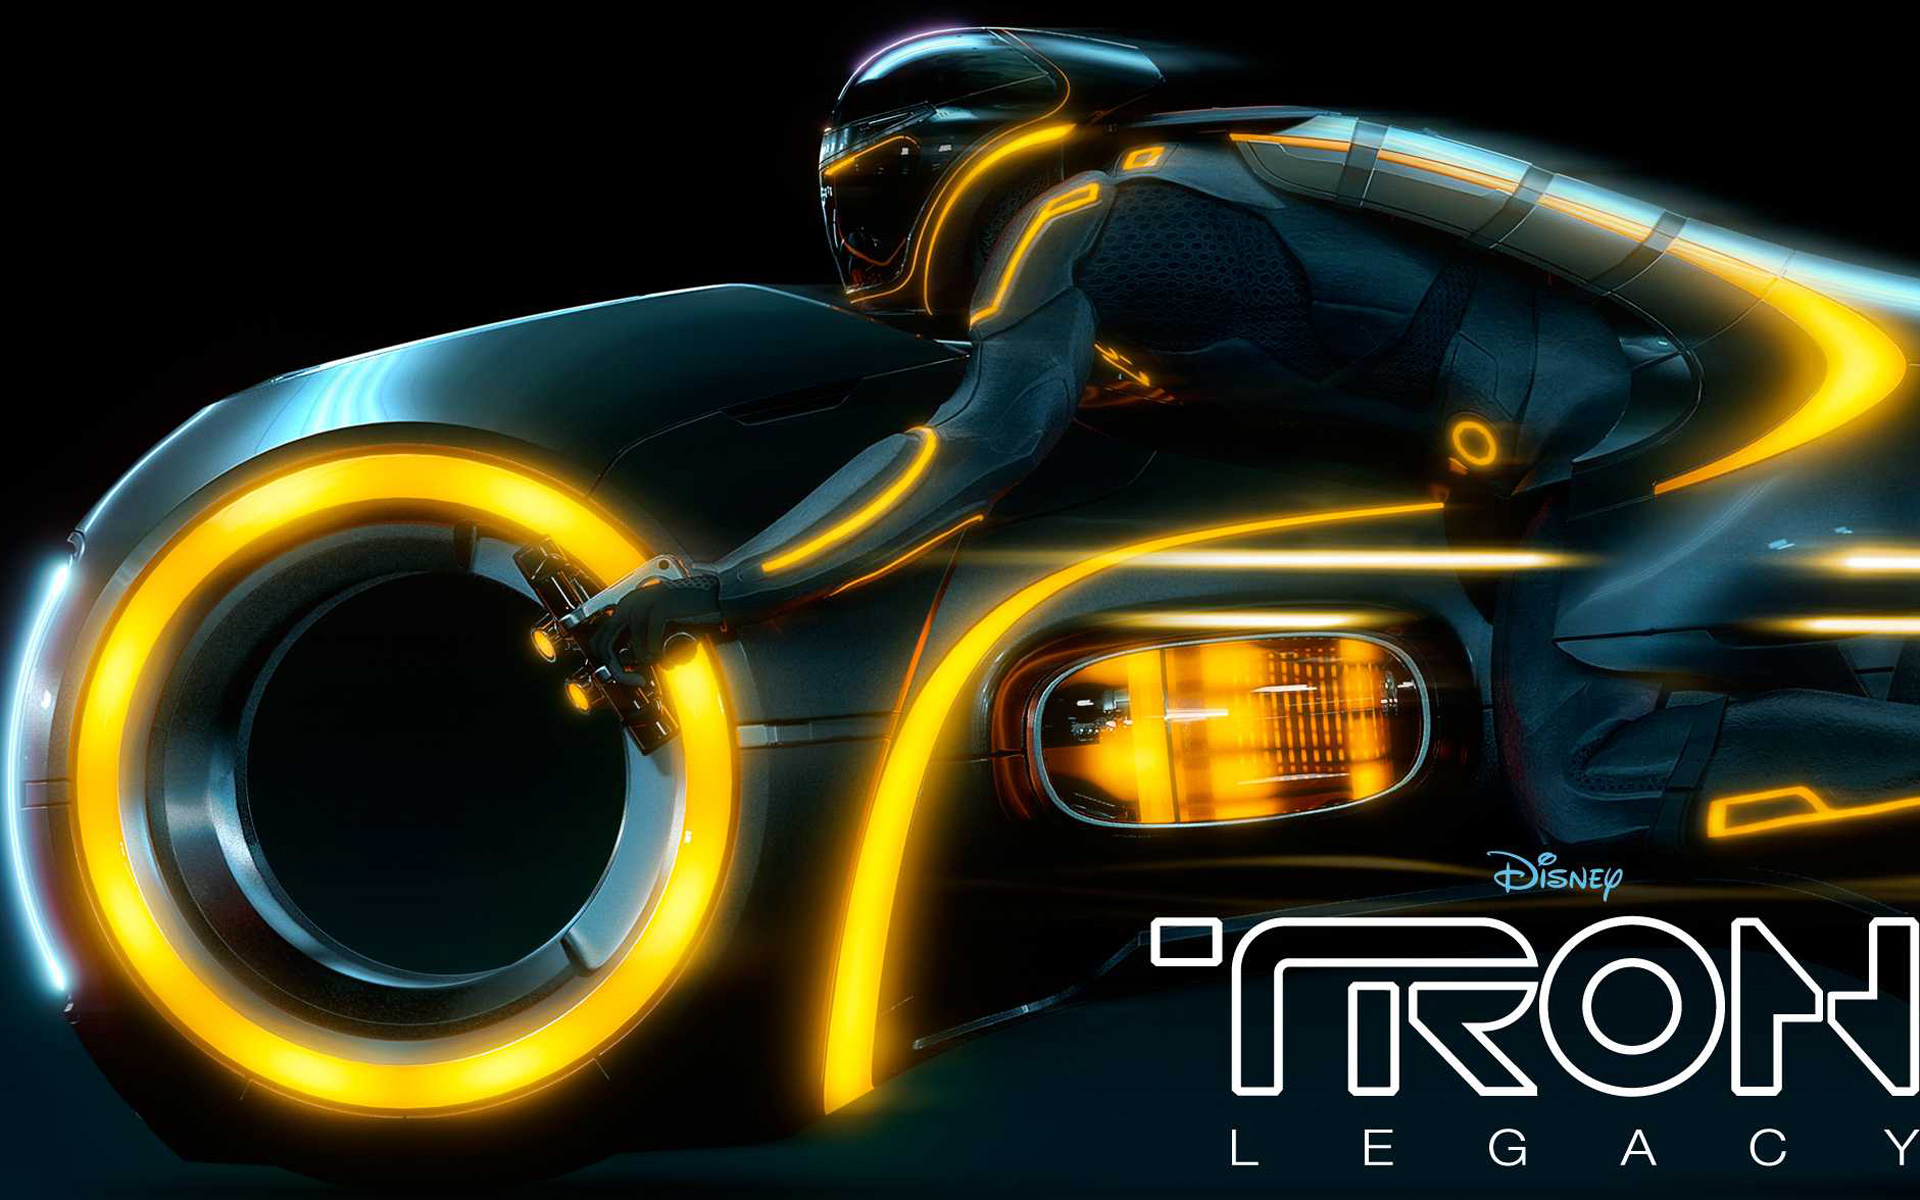 2010 Tron Legacy 2 Wallpapers HD Wallpapers 1920x1200